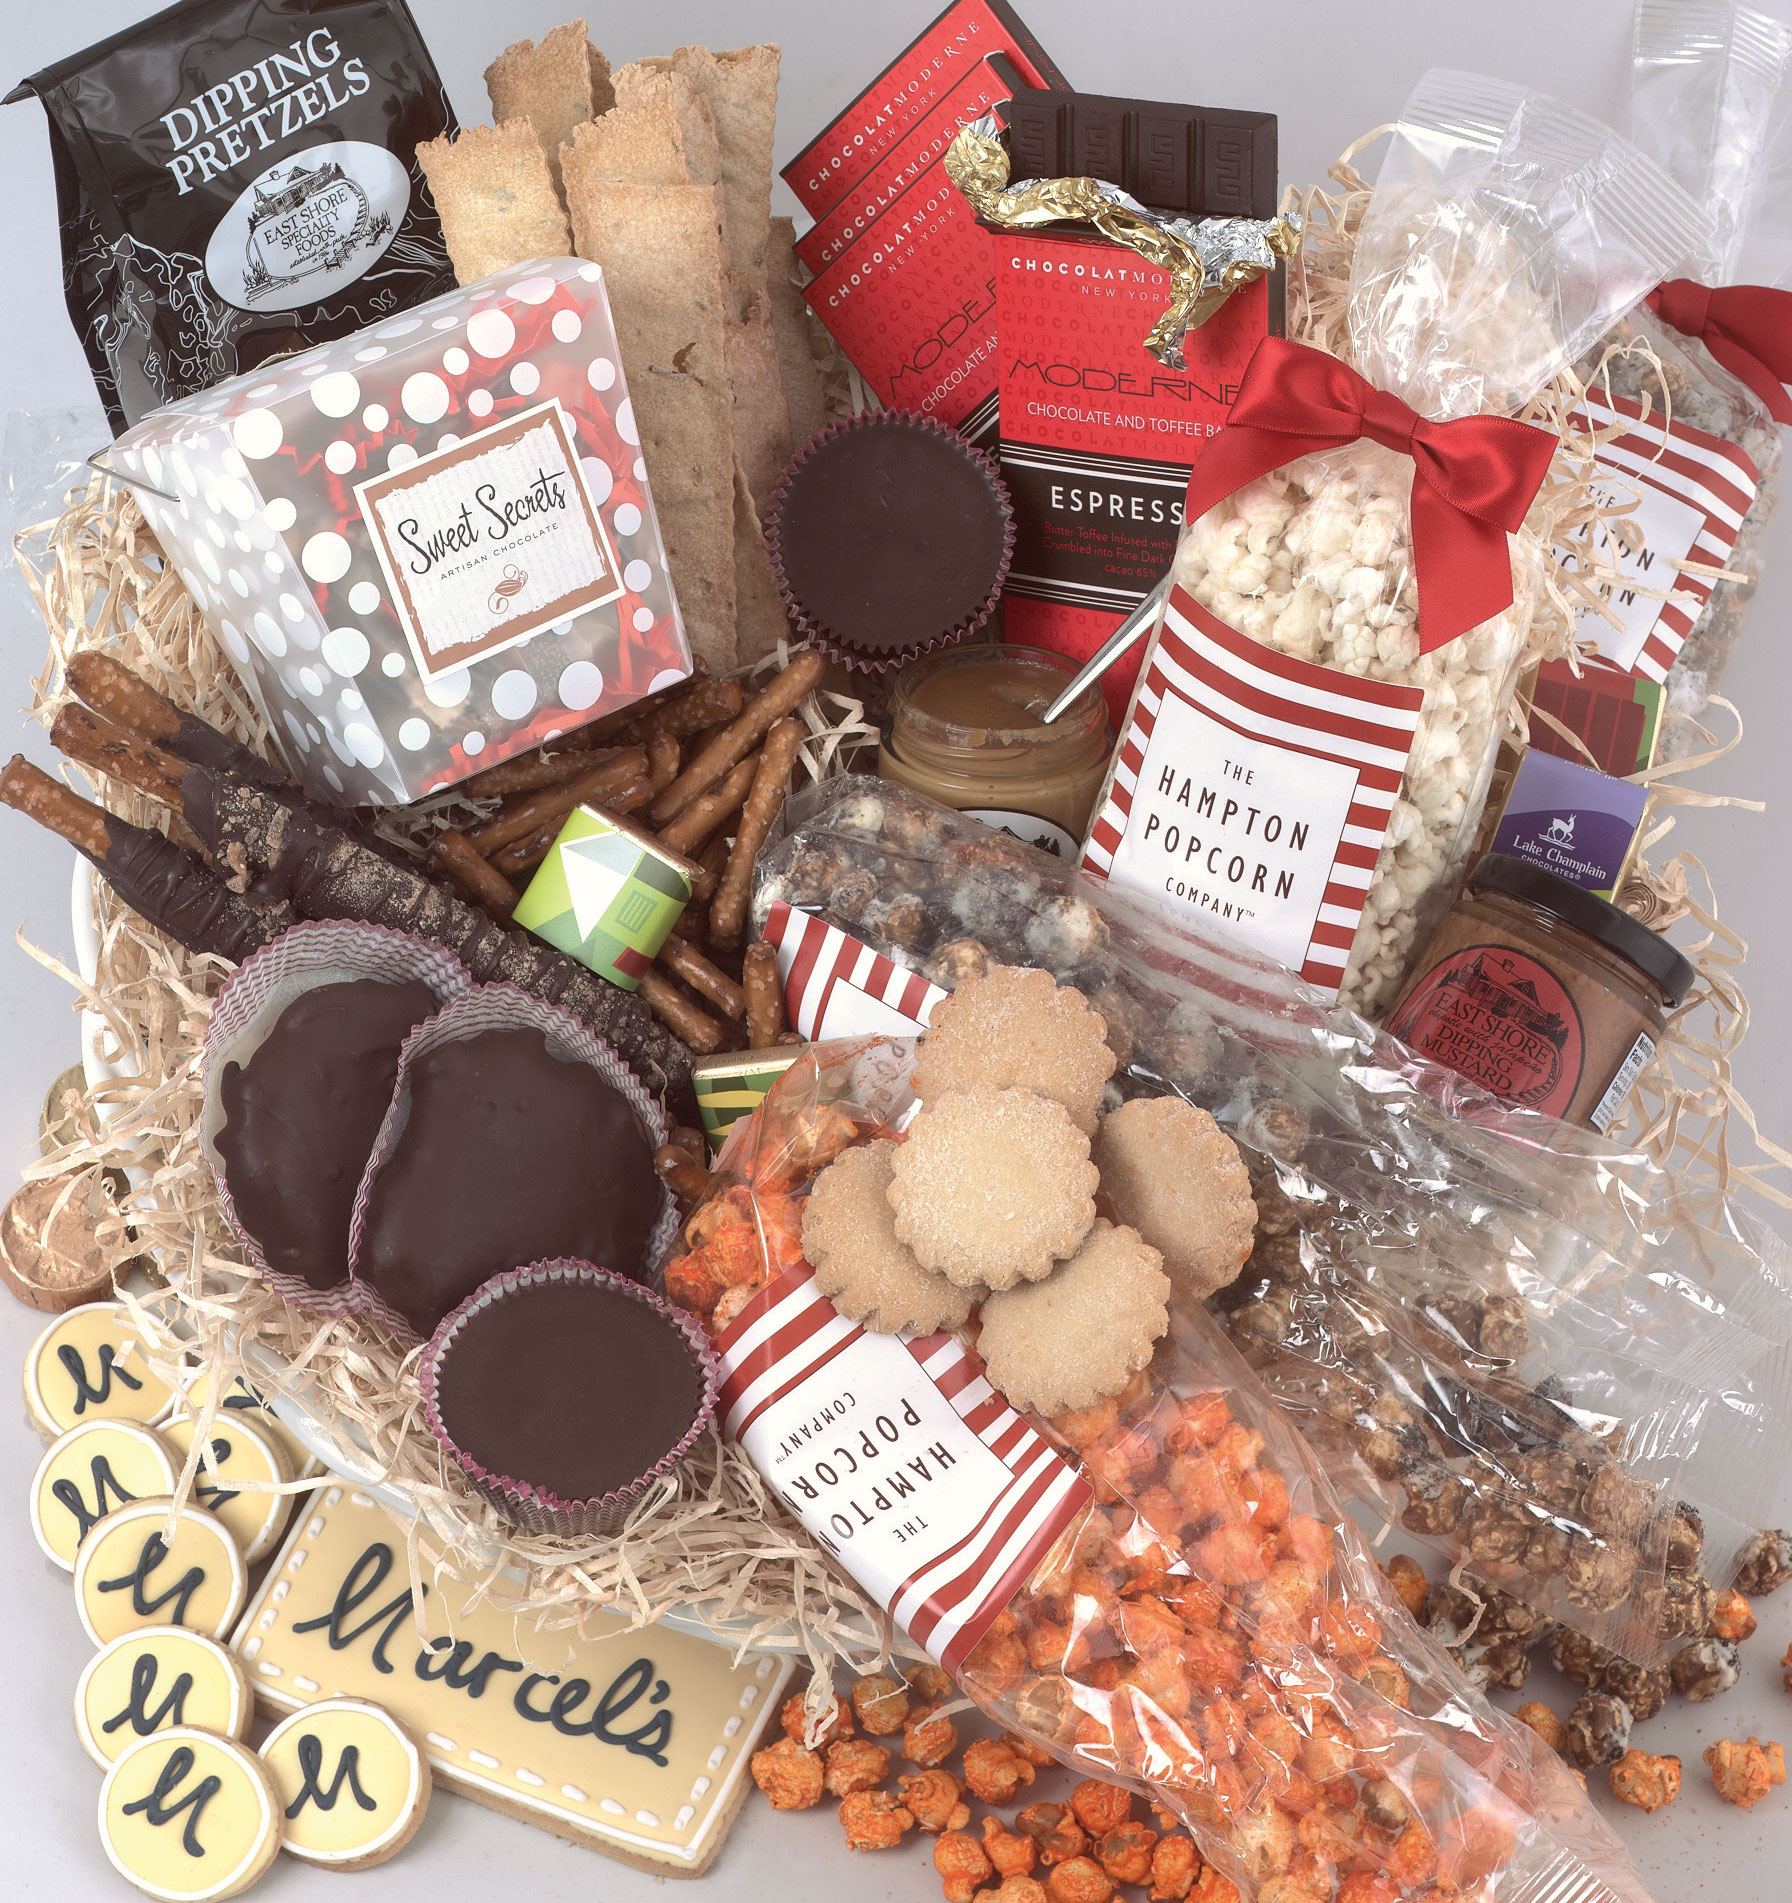 Gift baskets from Marcel's start at $50, feature small-batch specialty foods, and can be shipped throughout the U.S.